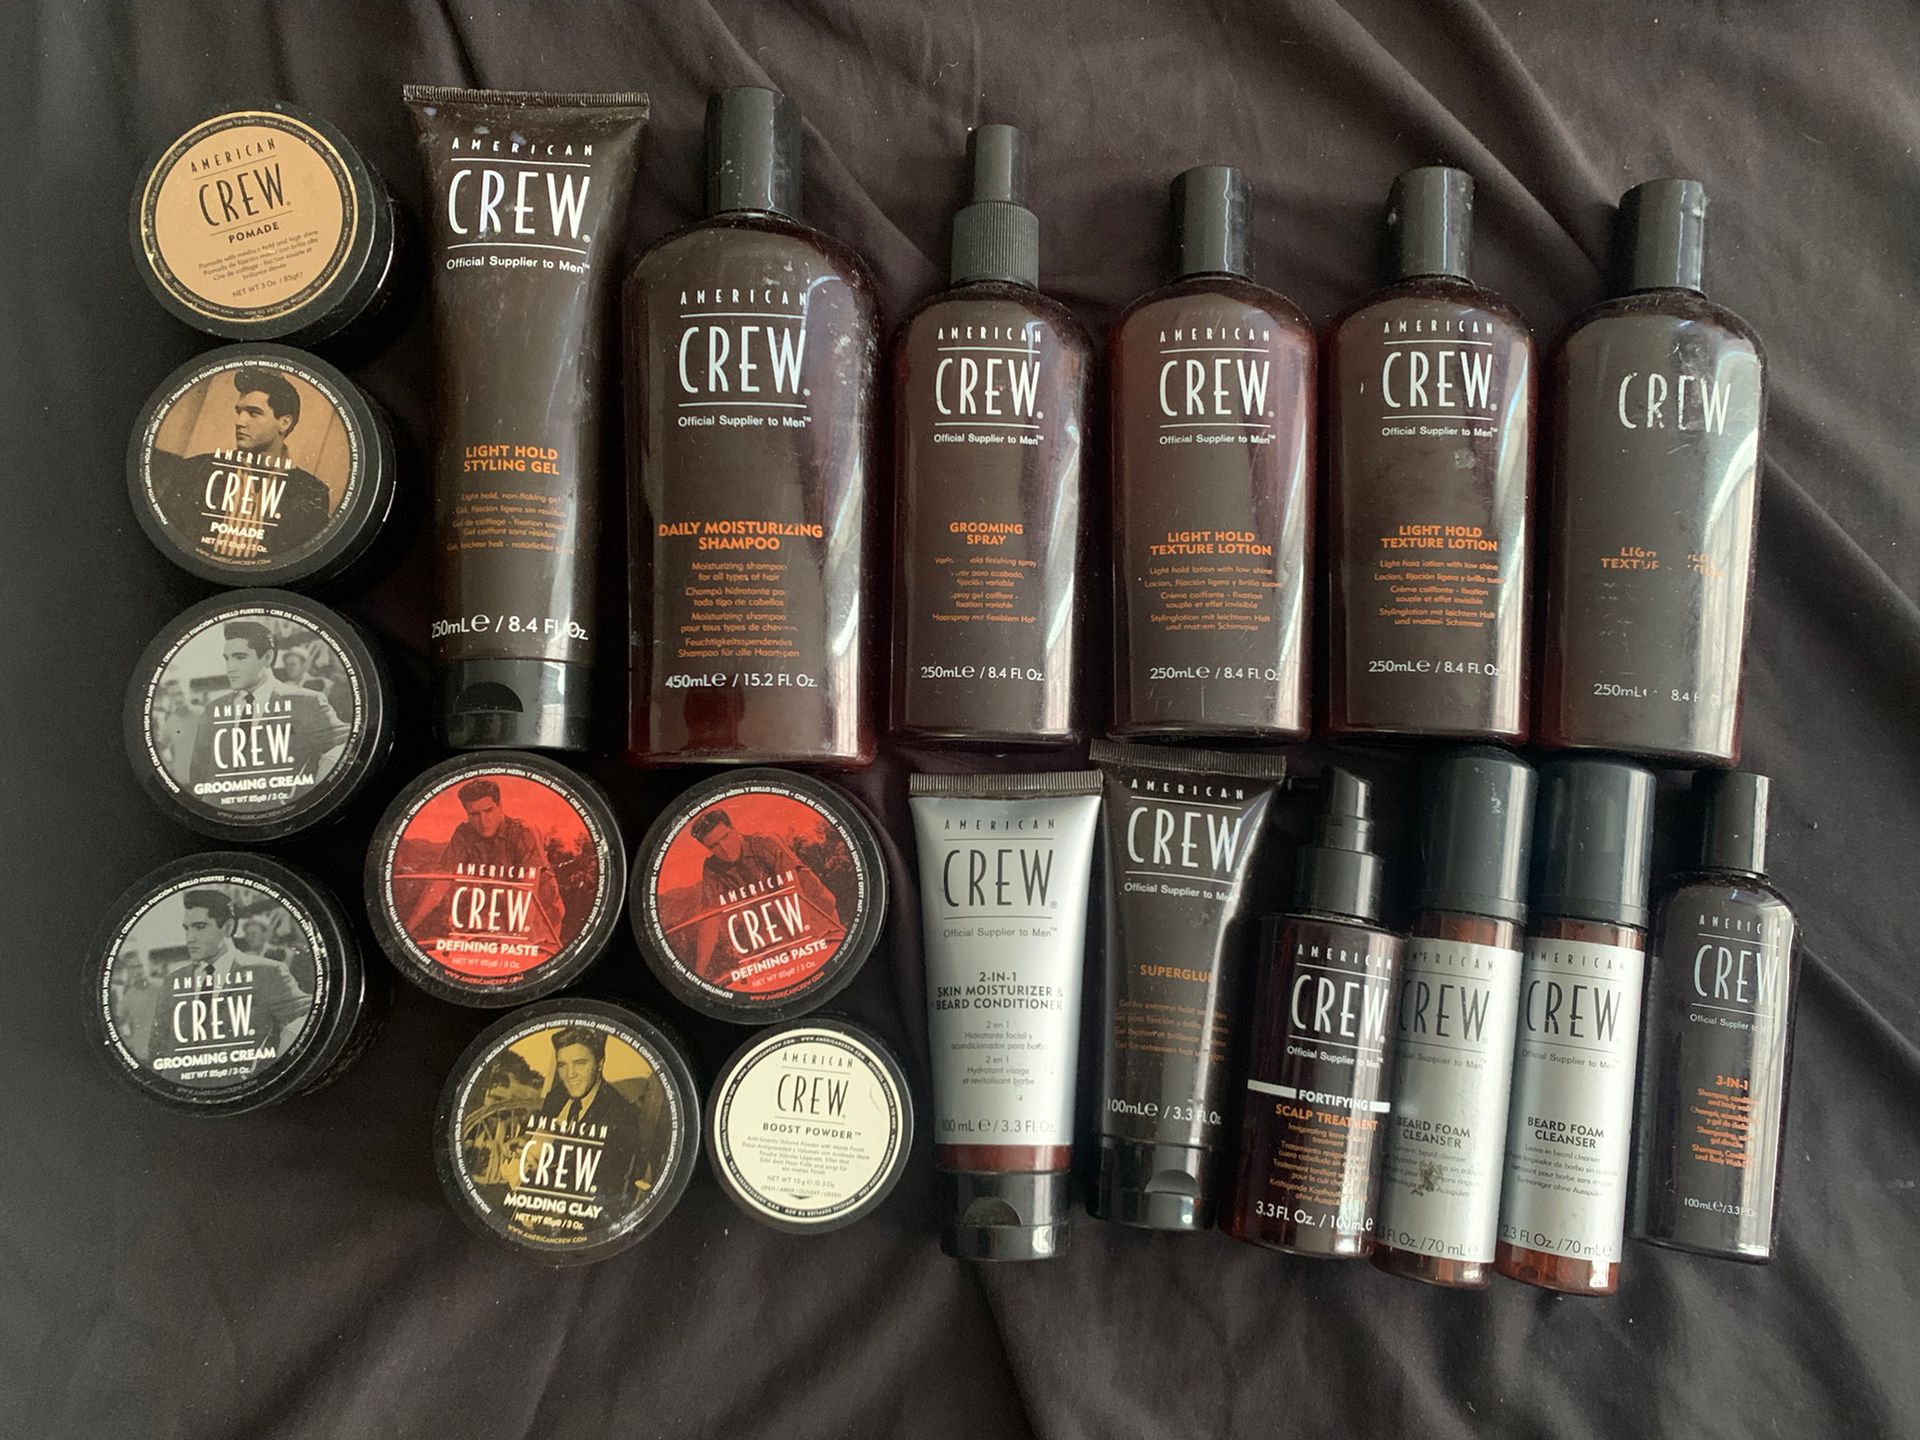 American Crew Grooming Products